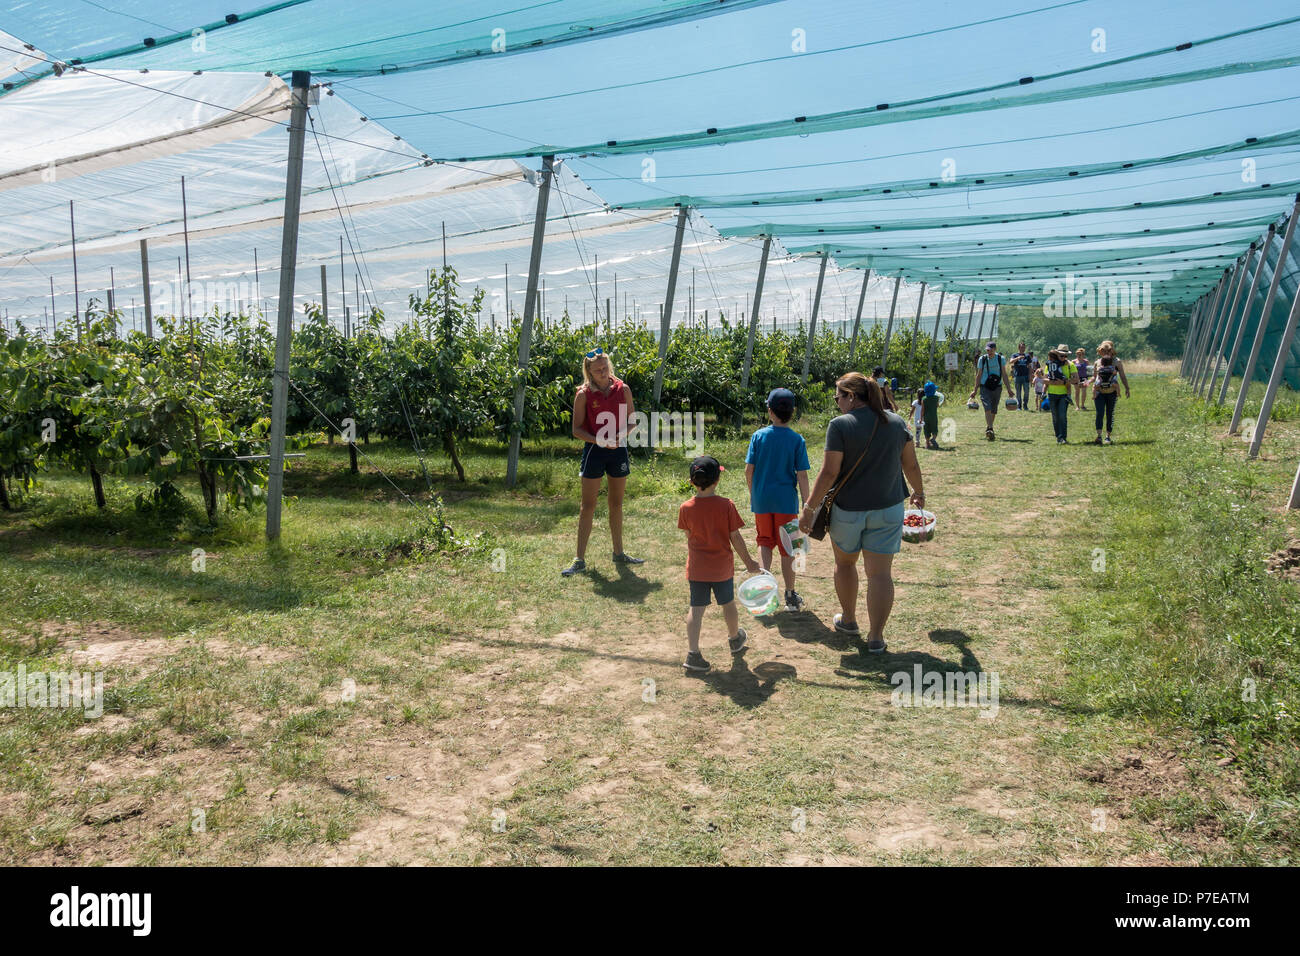 Cherry trees protected by netting on a pick your own fruit farm. Stock Photo